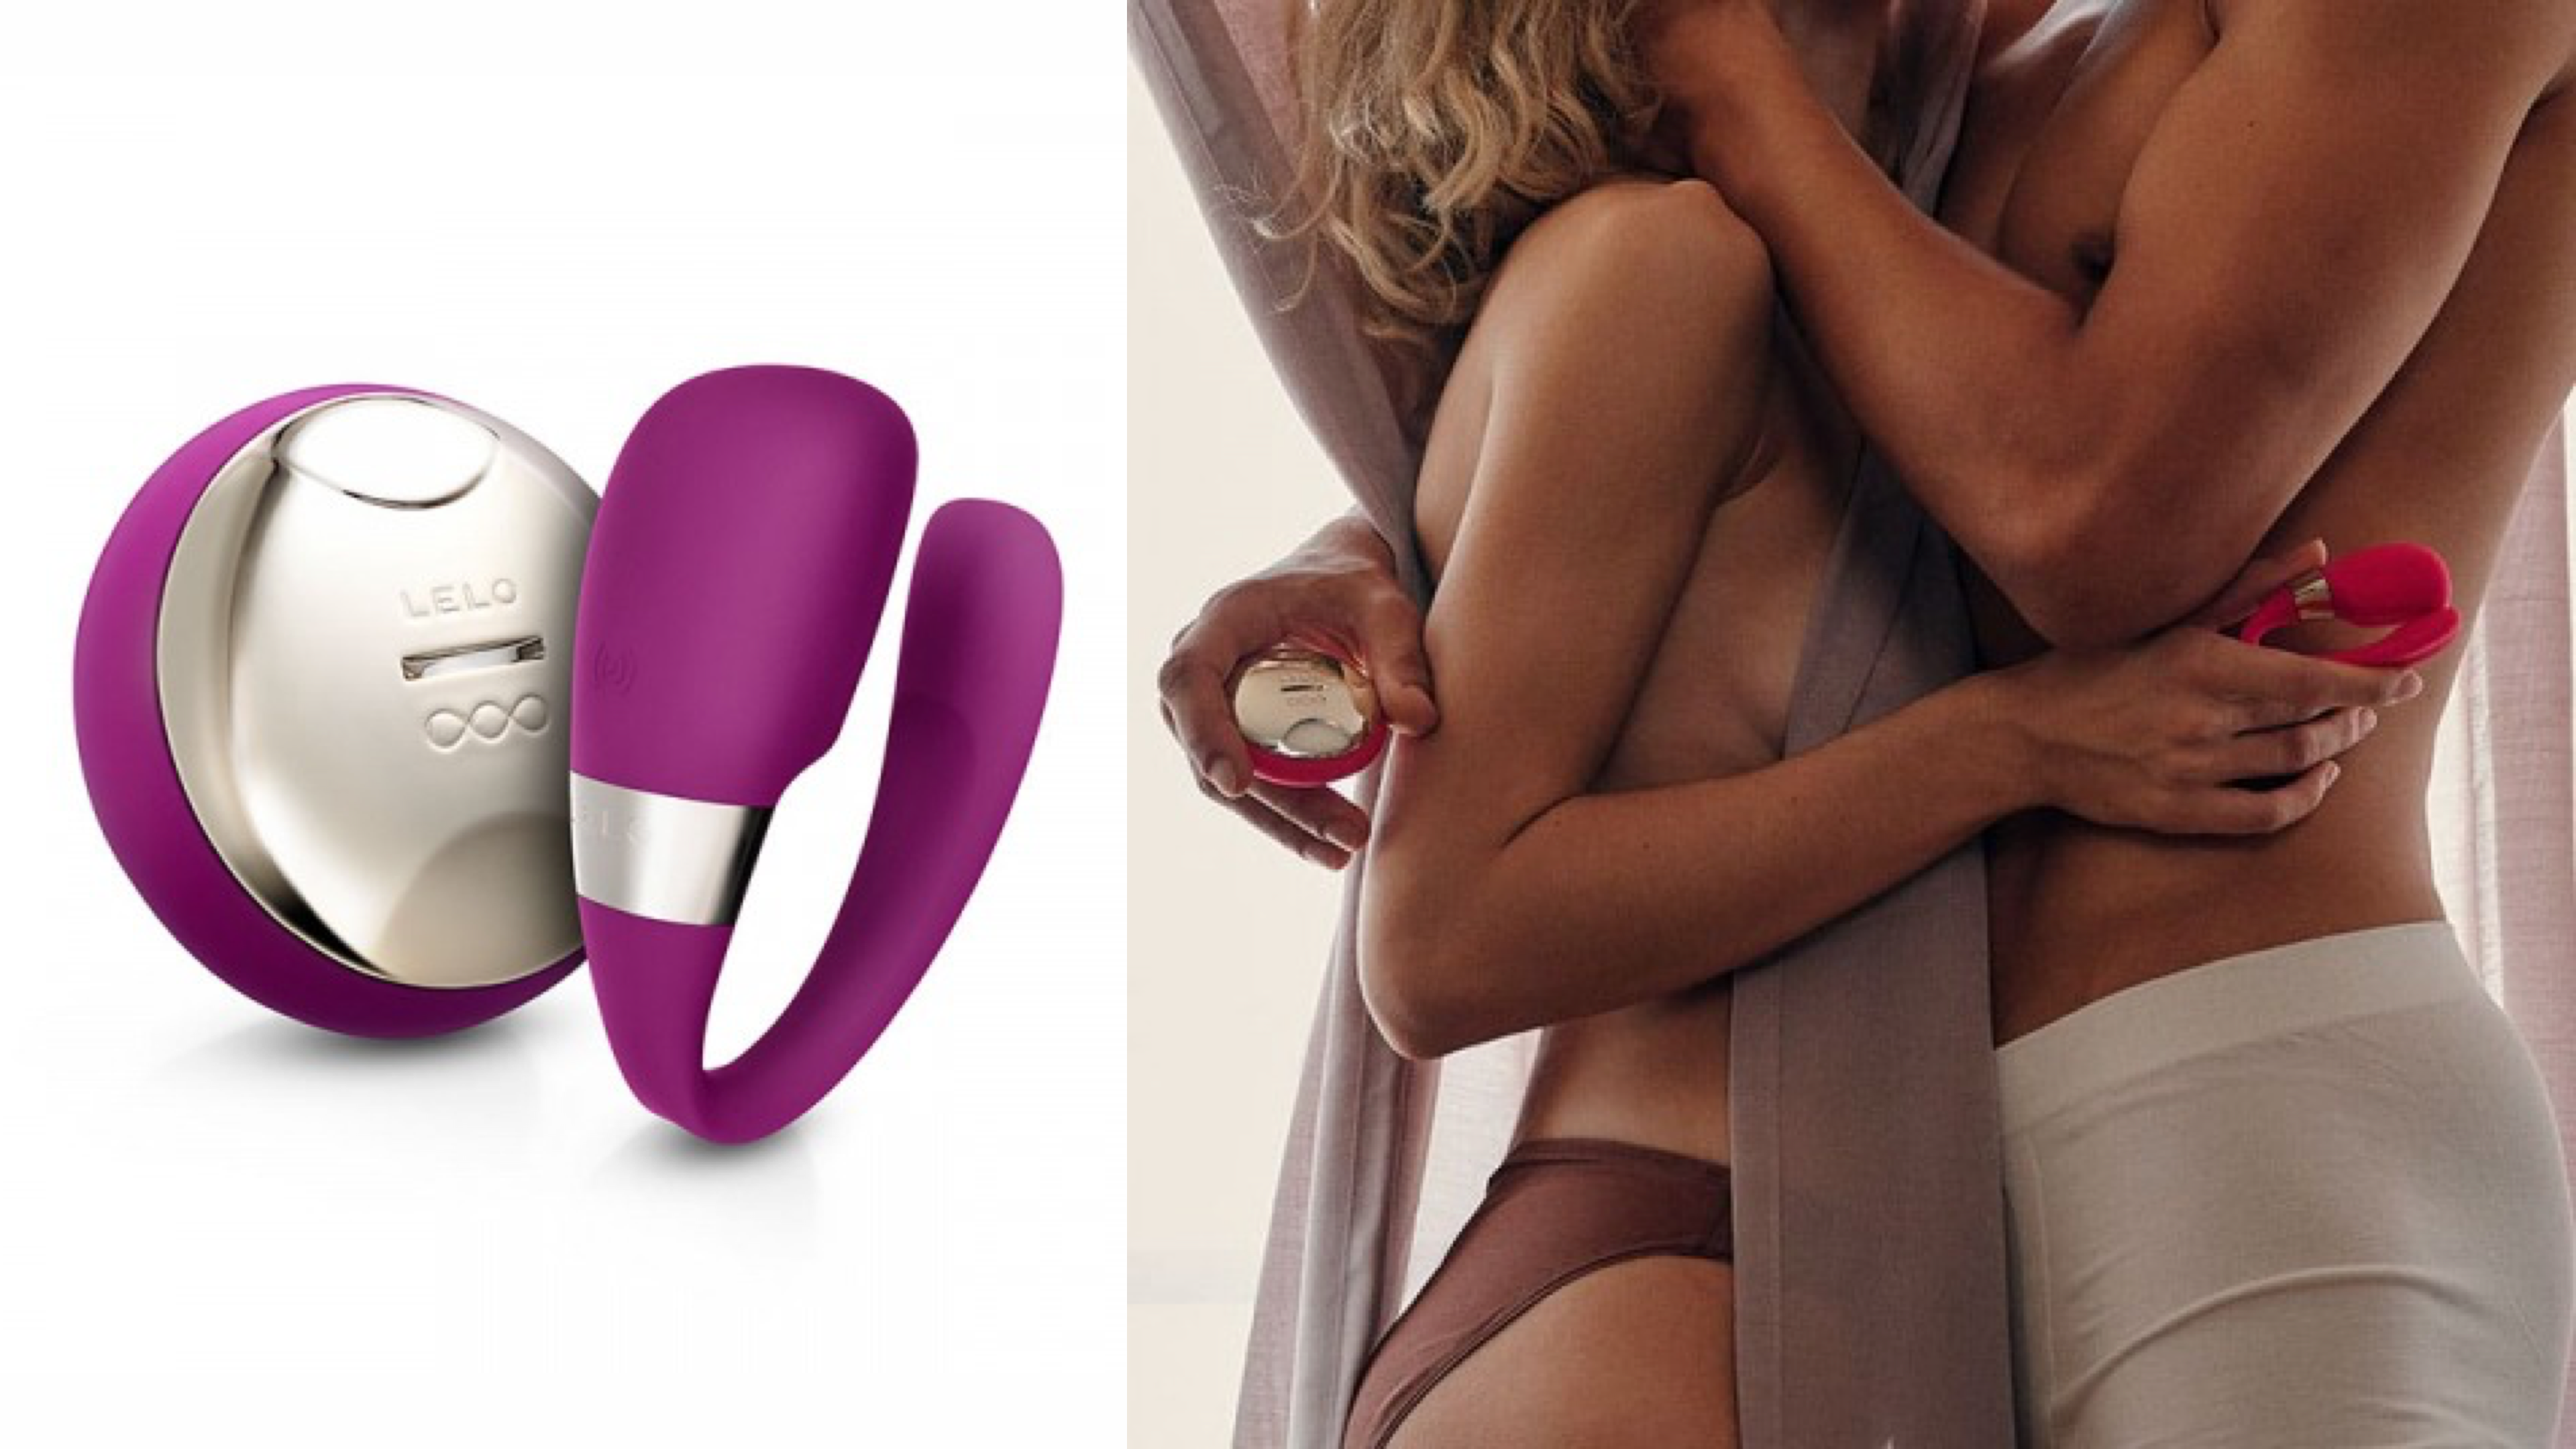 hands-free couples vibrator for internal and external stimulation